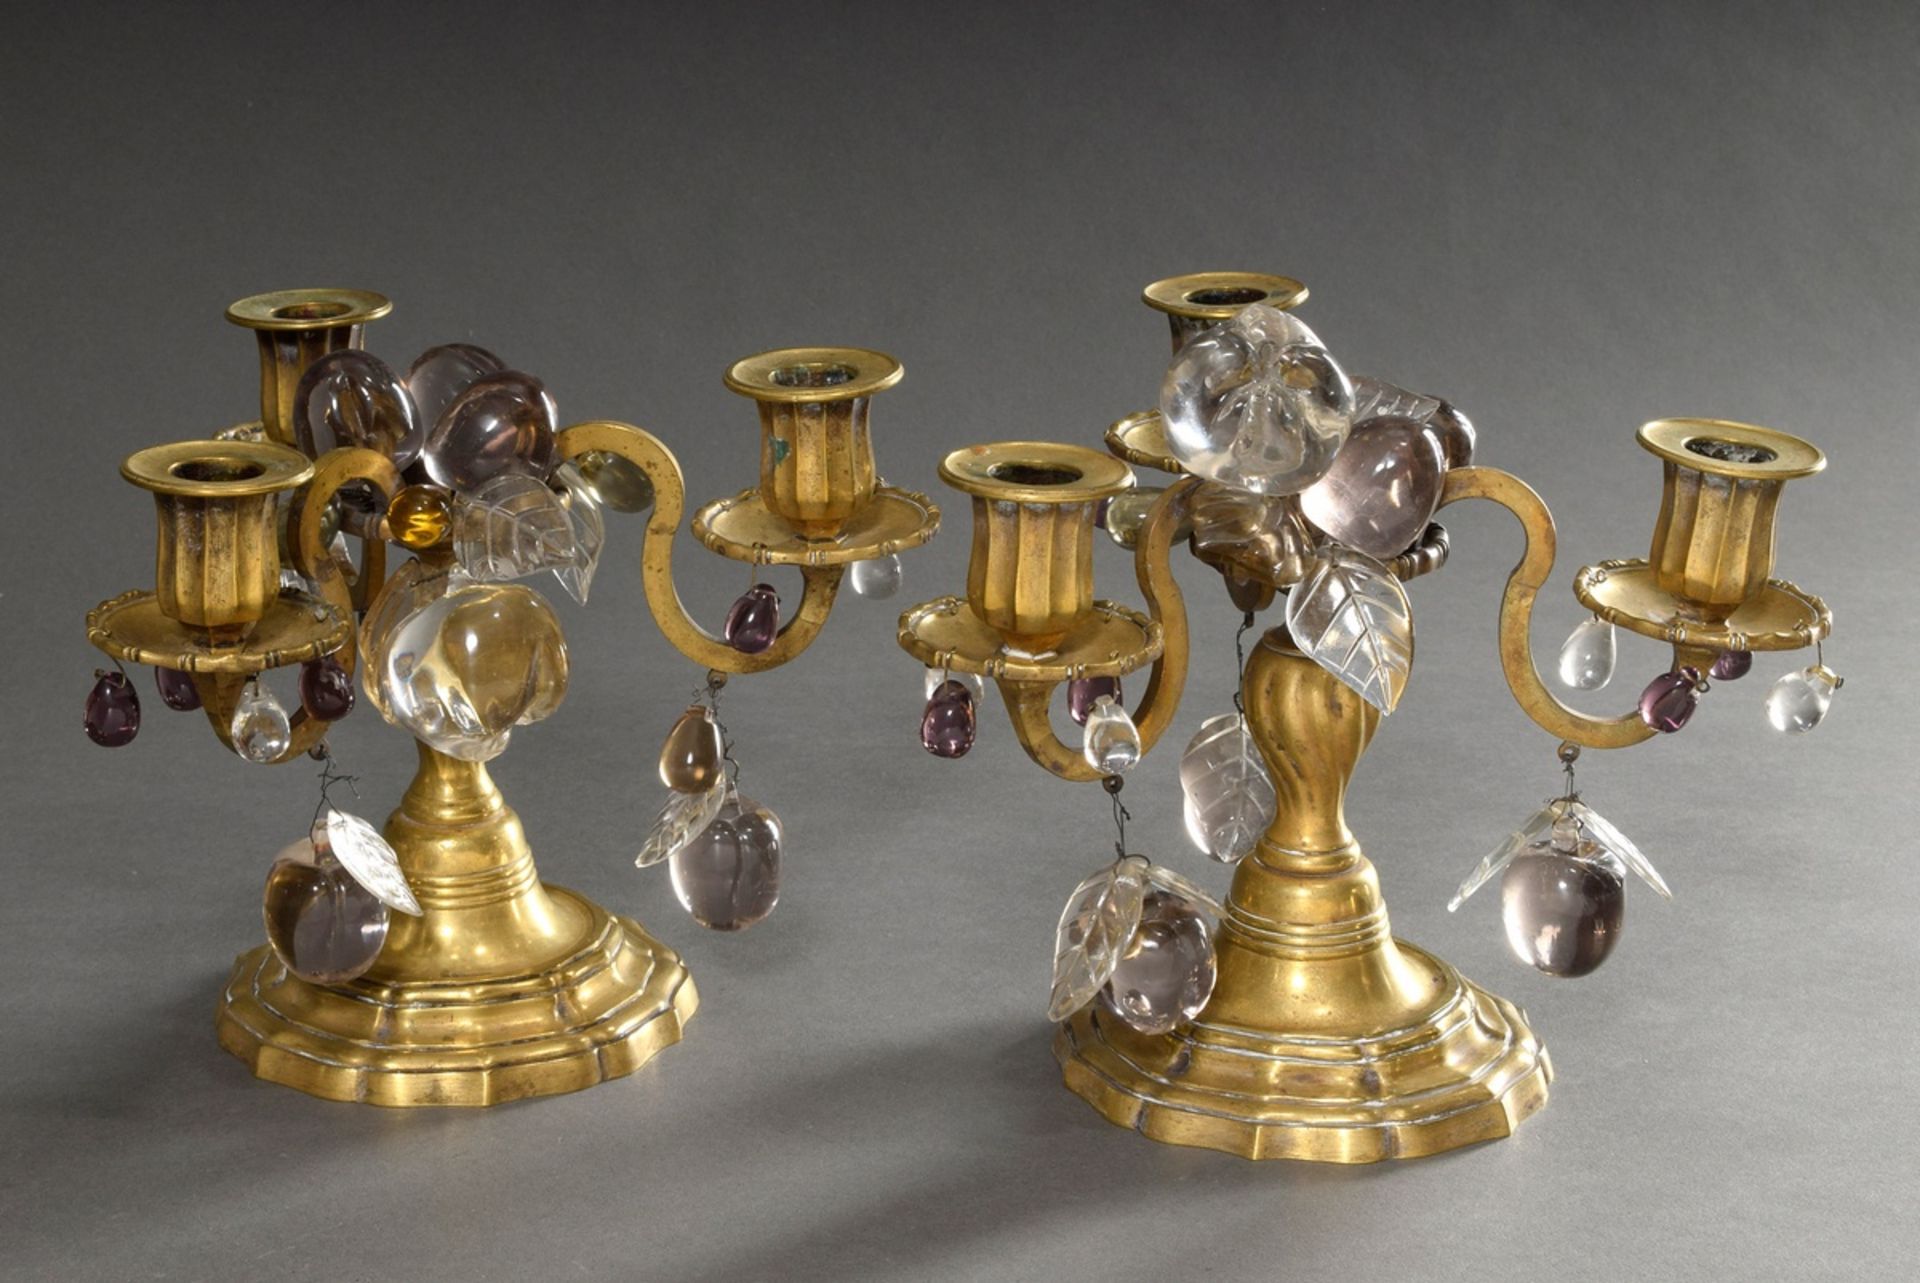 Pair of three-lamp French bronze girandoles with coloured "fruit" prisms in Louis XV style, 19th ce